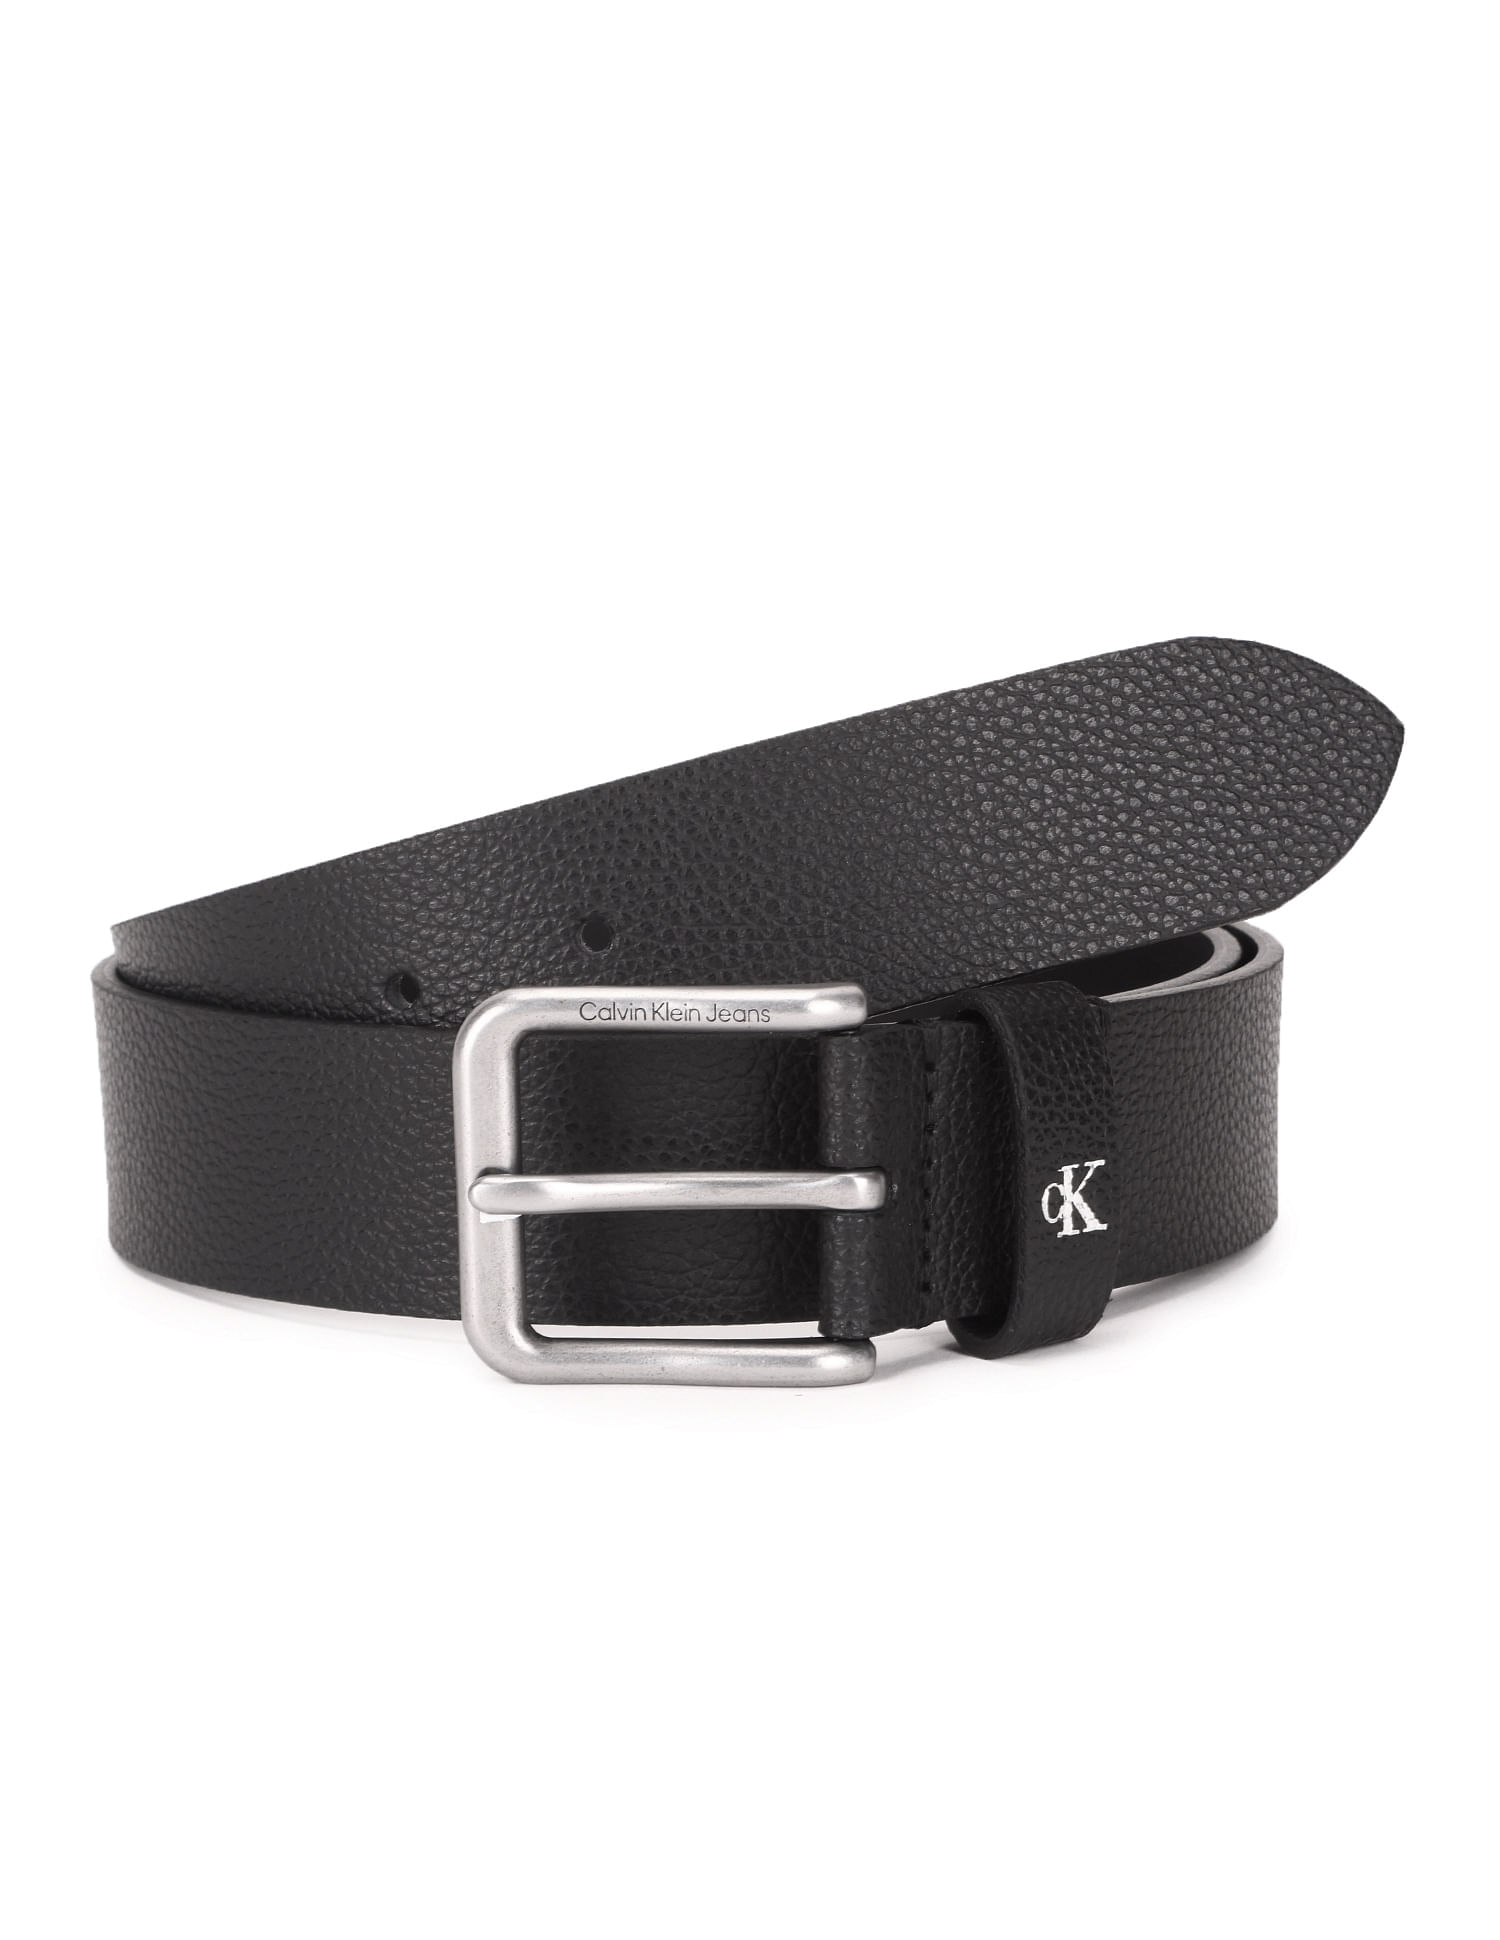 Buy Calvin Klein Jeans Round Leather Belt Classic